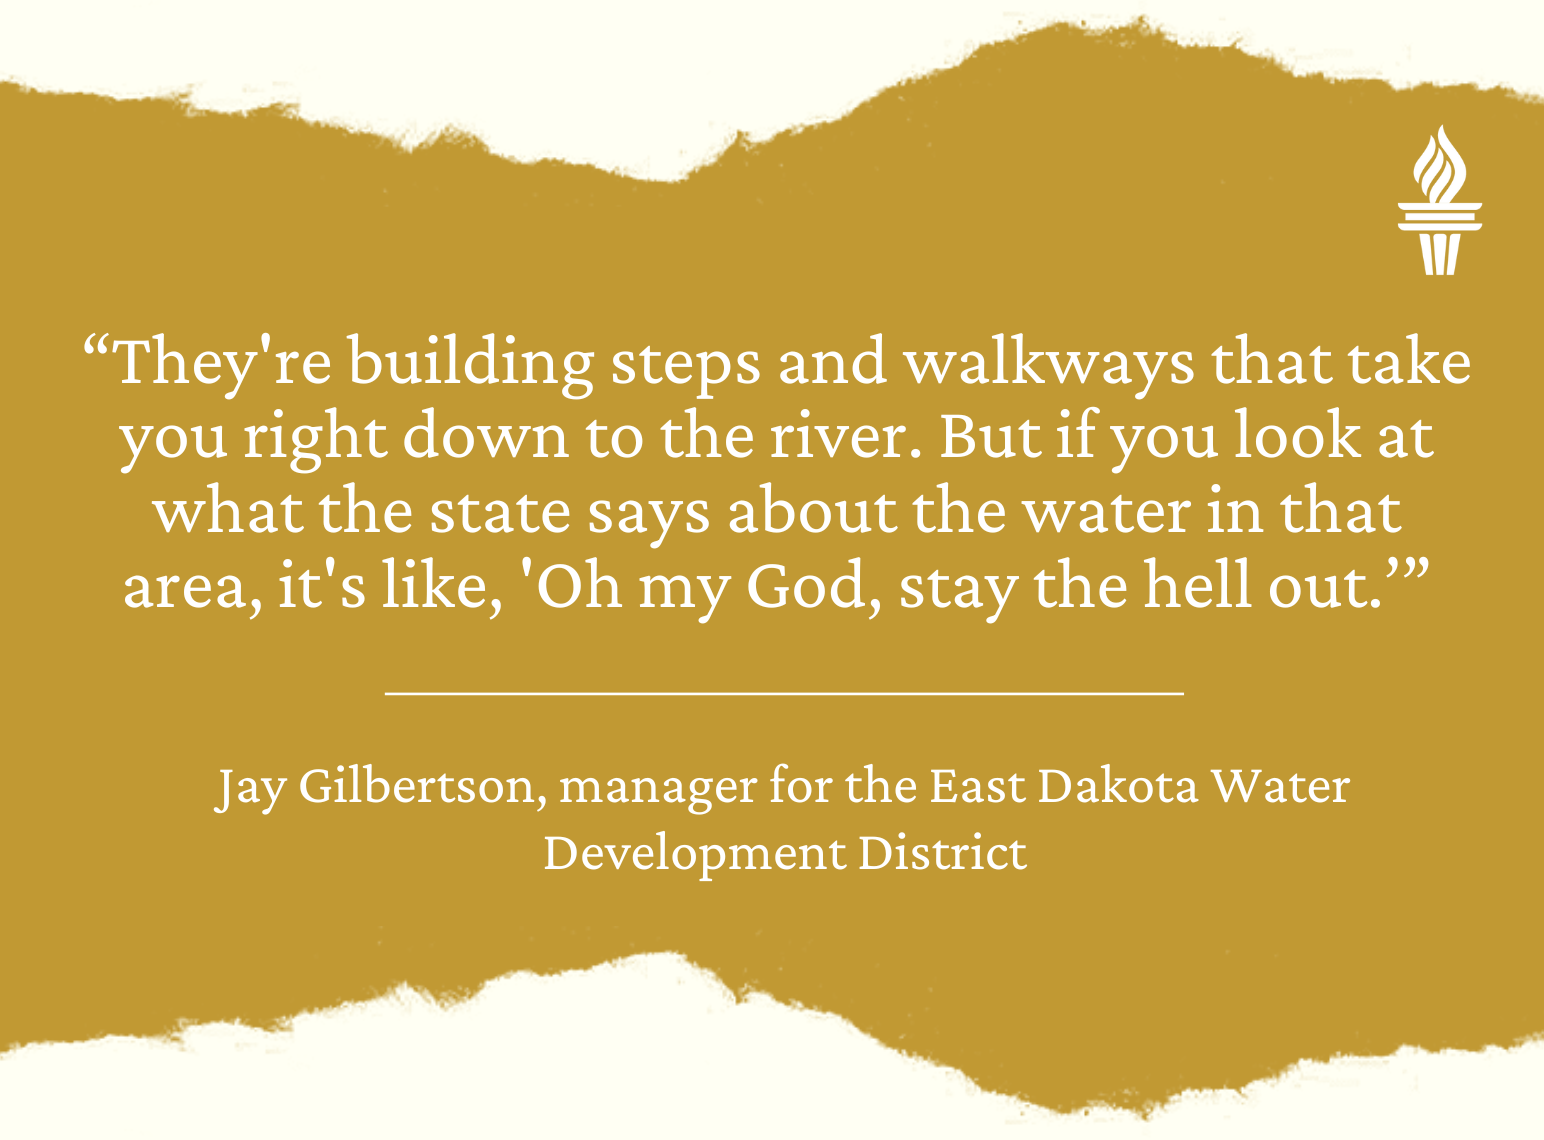 Quote from Jay Gilbertson, manager for East Dakota Water Development